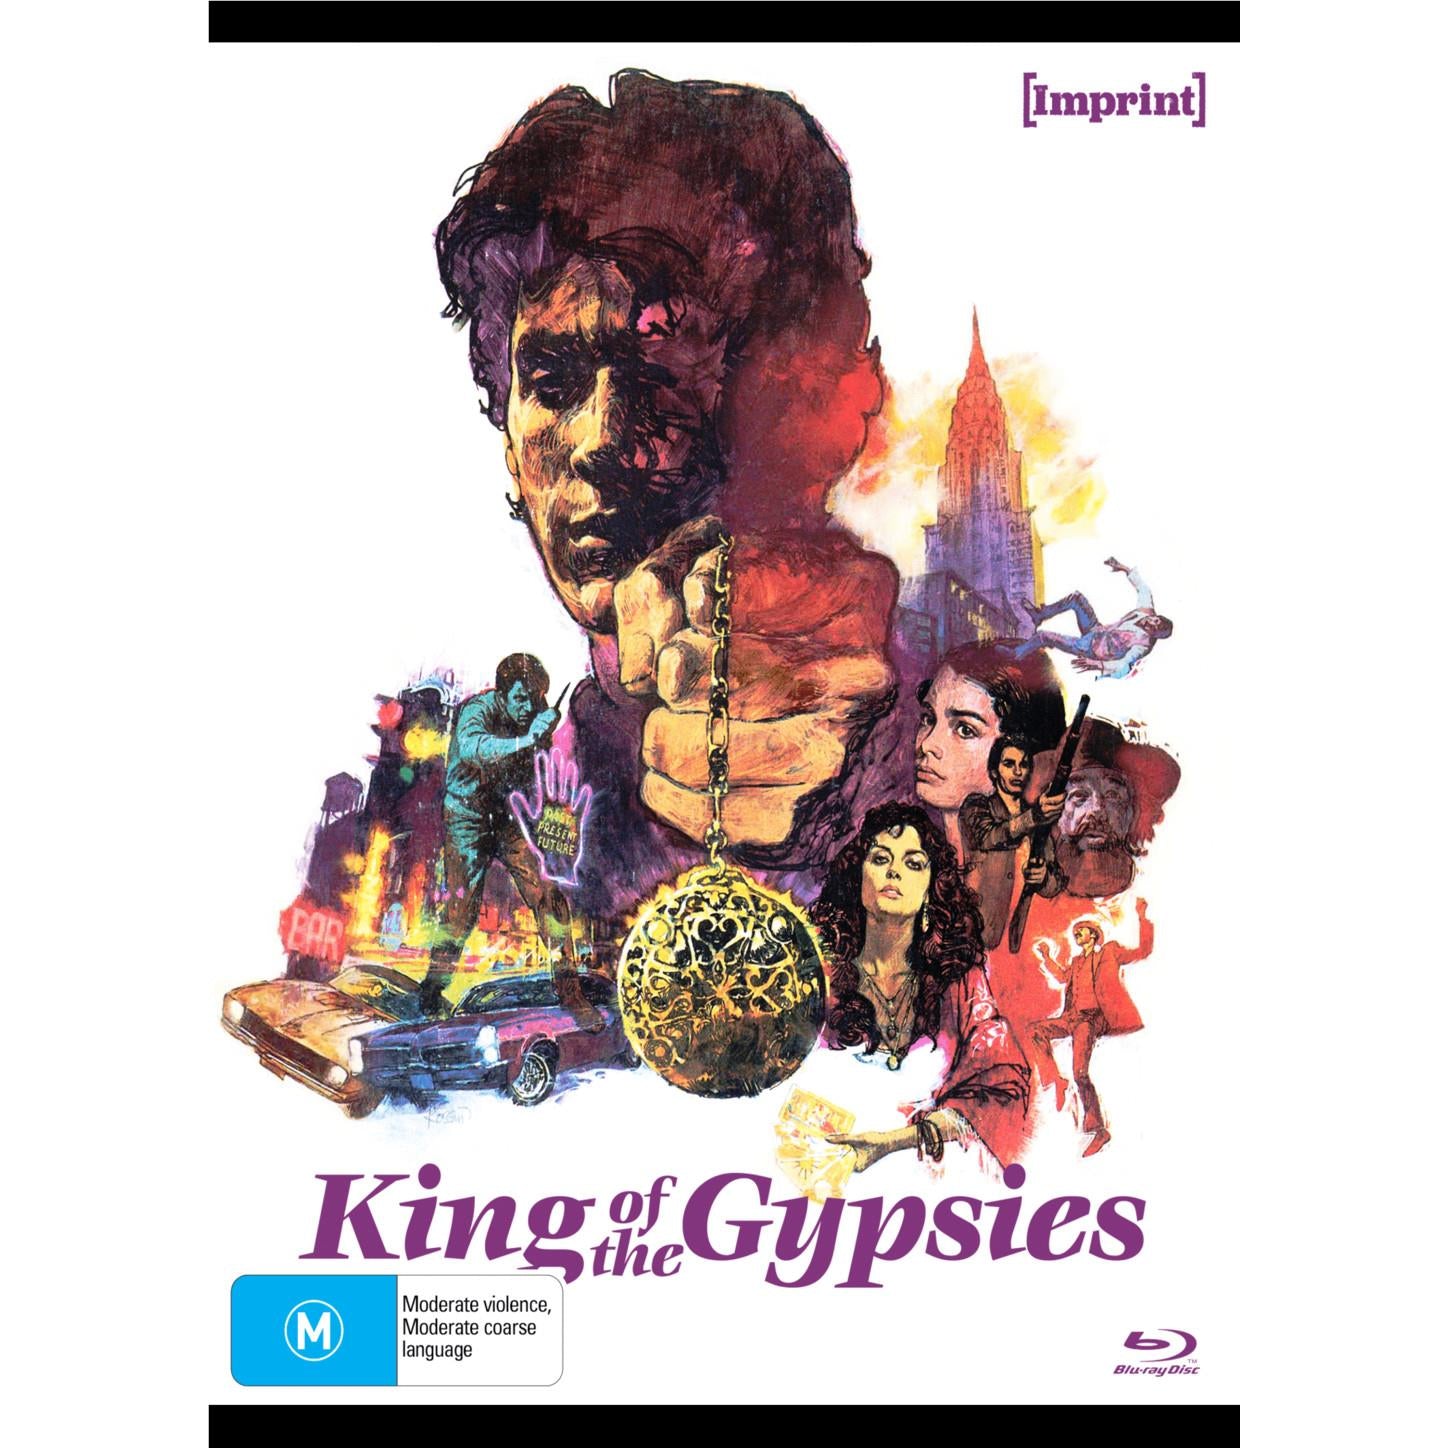 king of gypsies (imprint collection special edition)